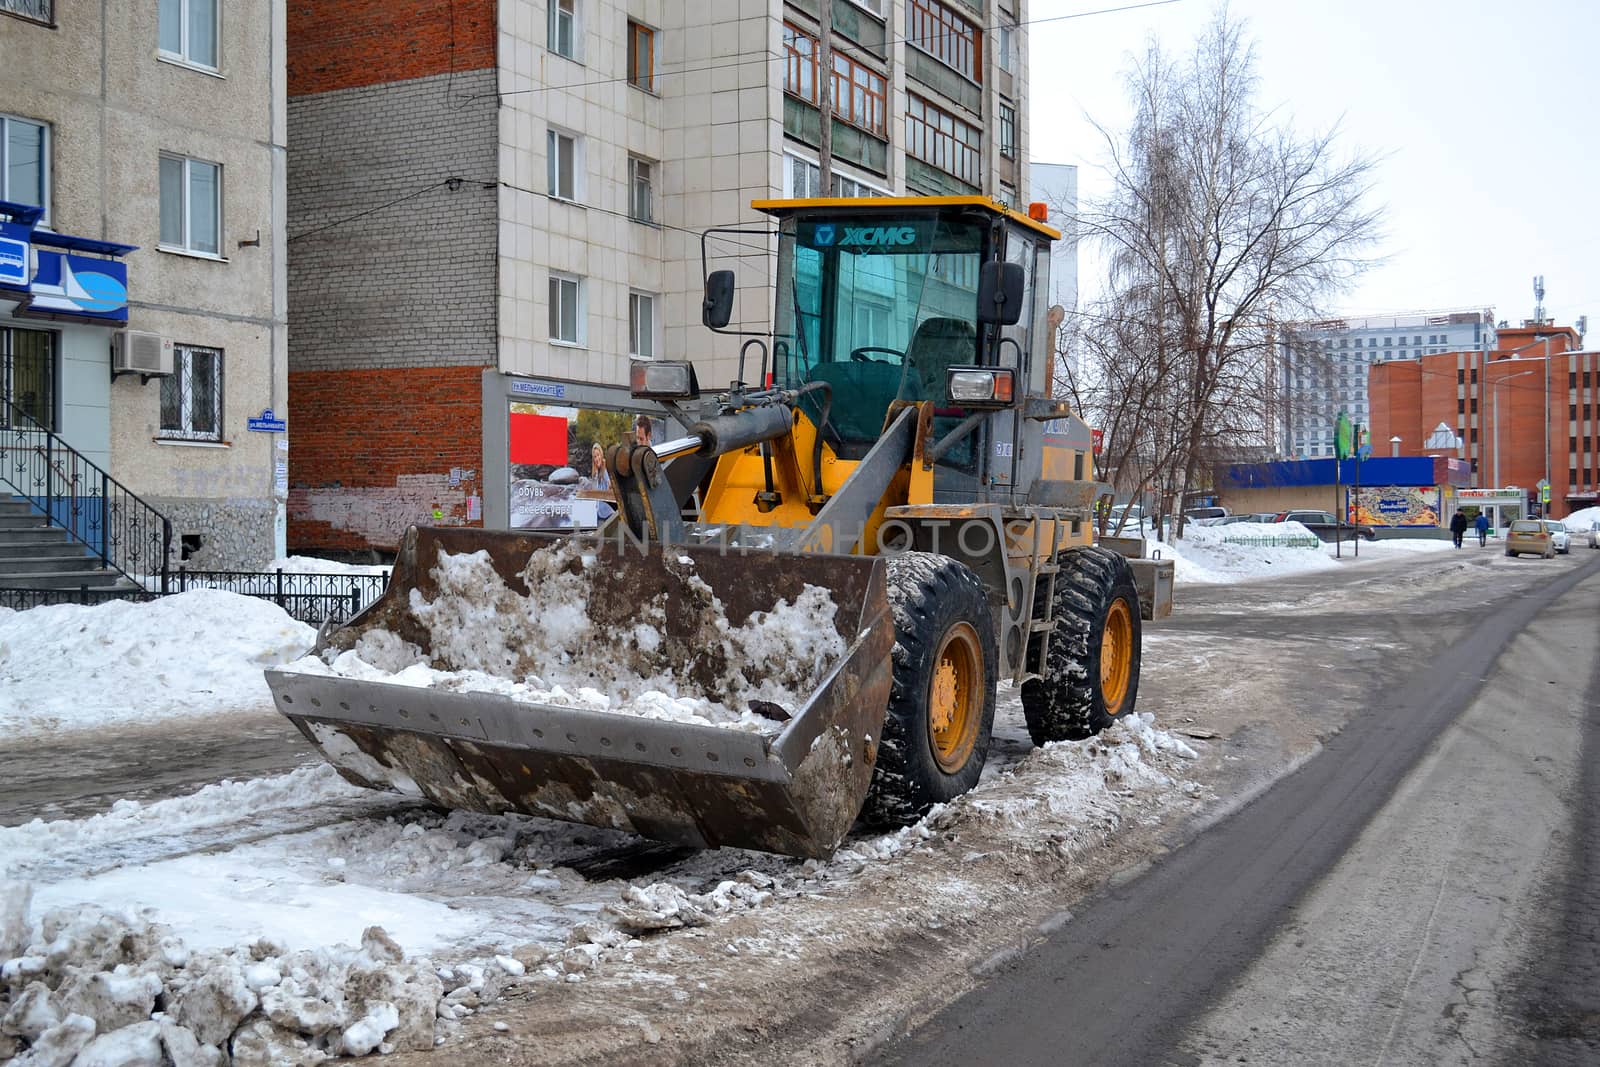 Cleaning of snow from city streets